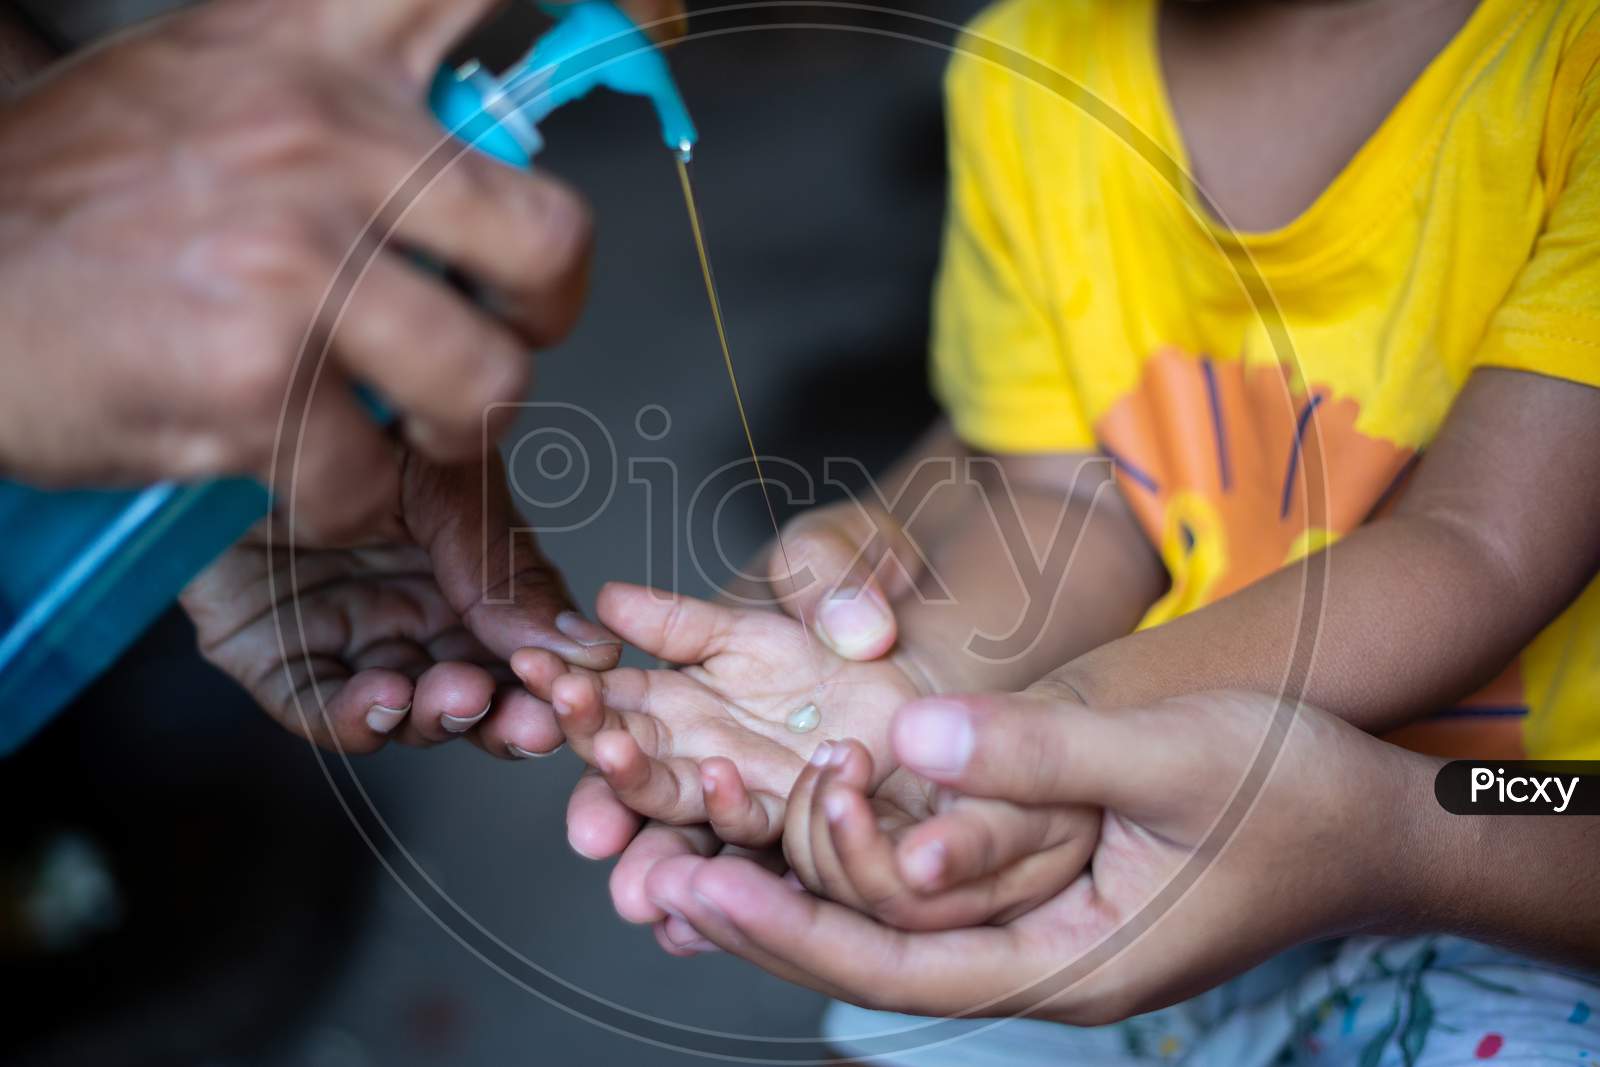 A Child Is Learning How To Clean Hands With Liquid Cleaning Gel. To Prevent Coronavirus, Rubbing Your Hands With Soap Is An Expert Way To Stop The Spread Of Coronavirus.